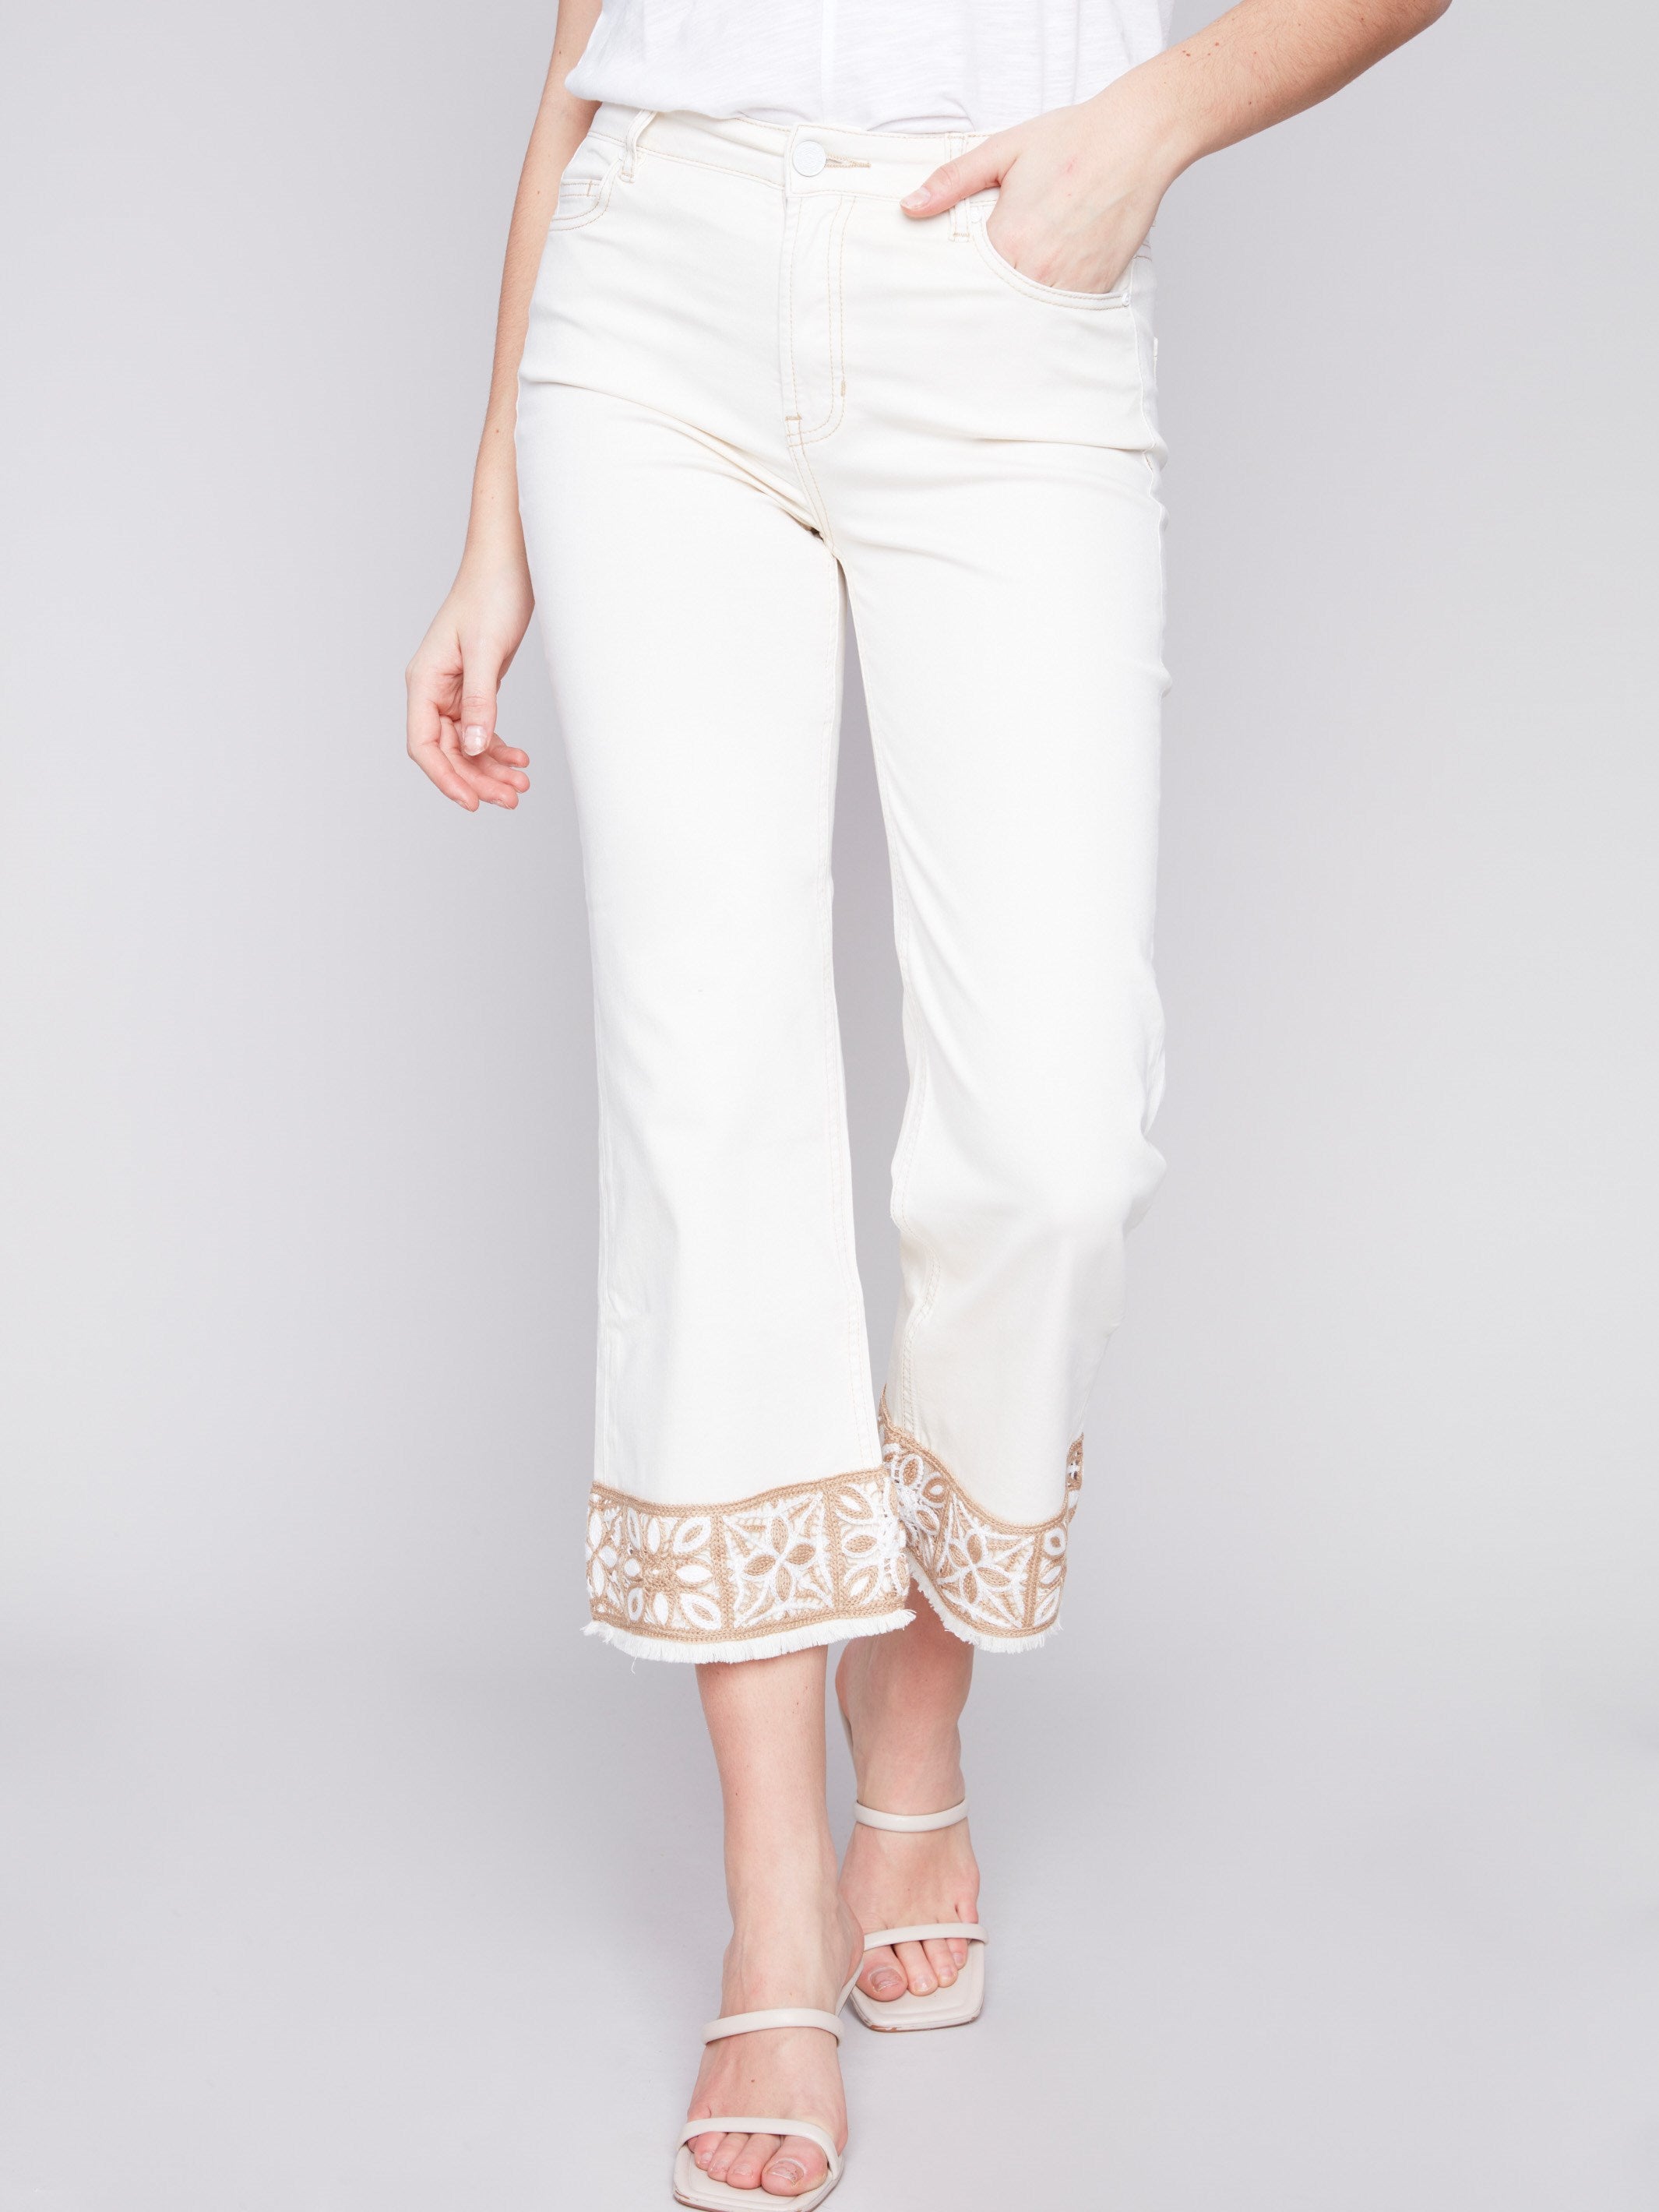 Twill Pants with Crochet Cuff - Natural - Charlie B Collection Canada - Image 2